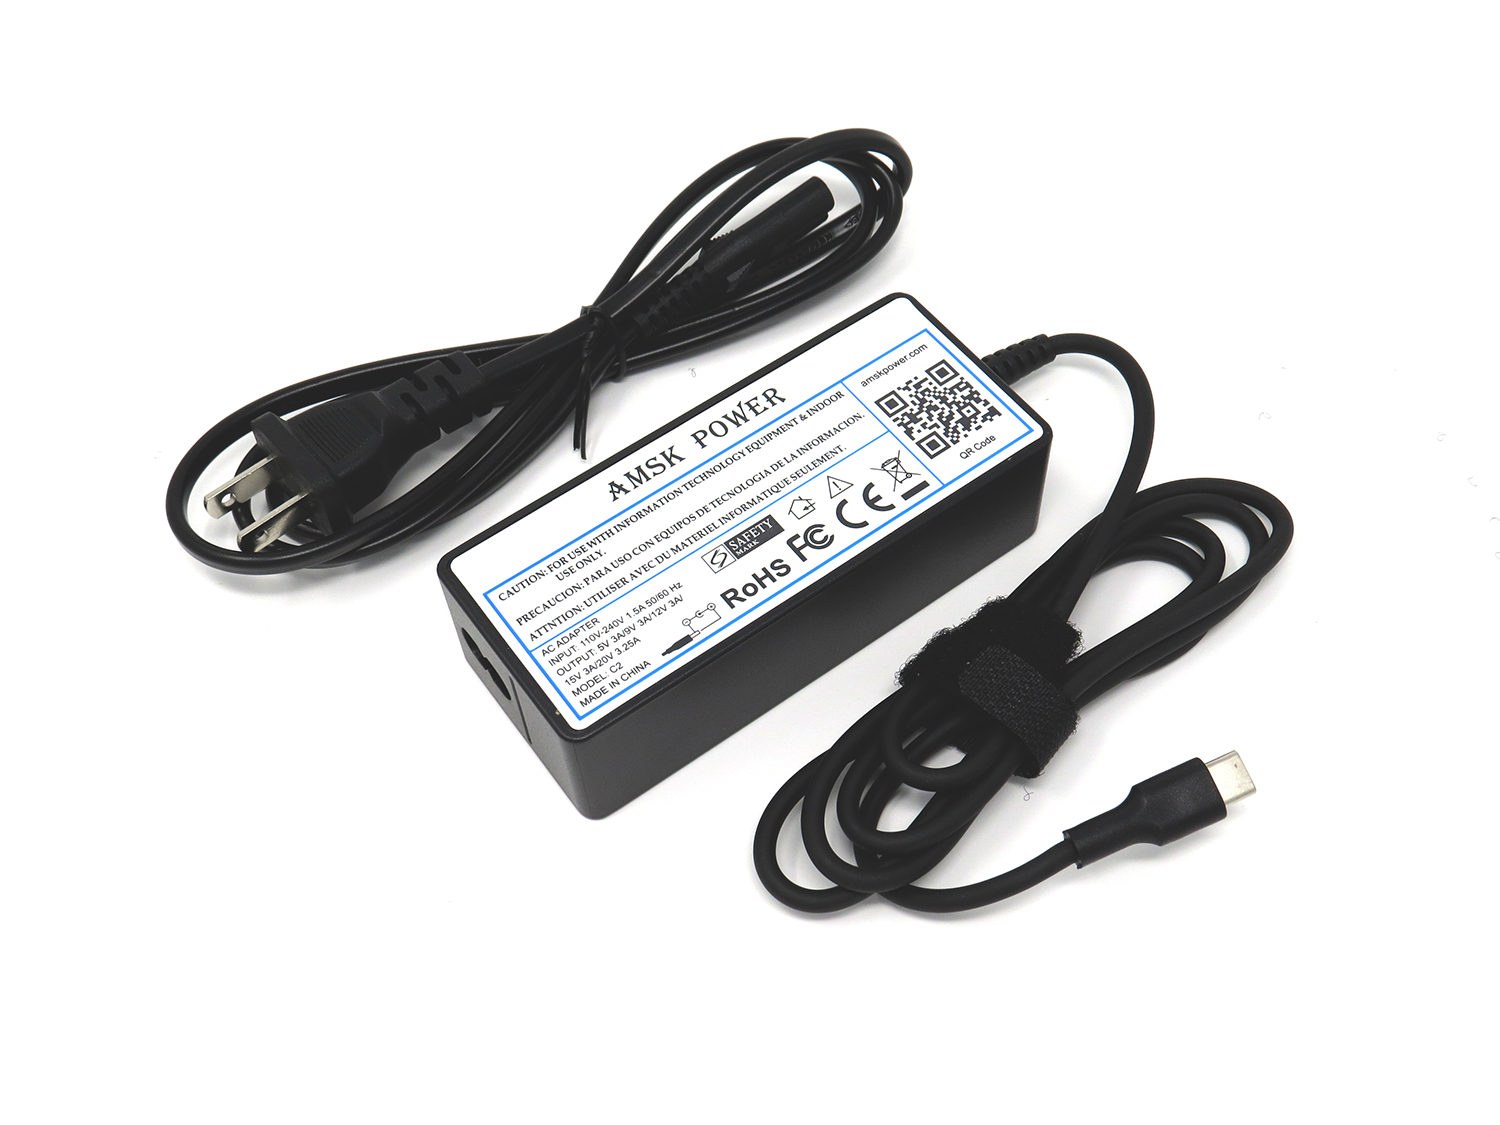 AMSK POWER Ac Adapter USB-C 65W for Acer Swift Spin 7 SF713 SF713-51 SP714 SP714-51 - image 1 of 1